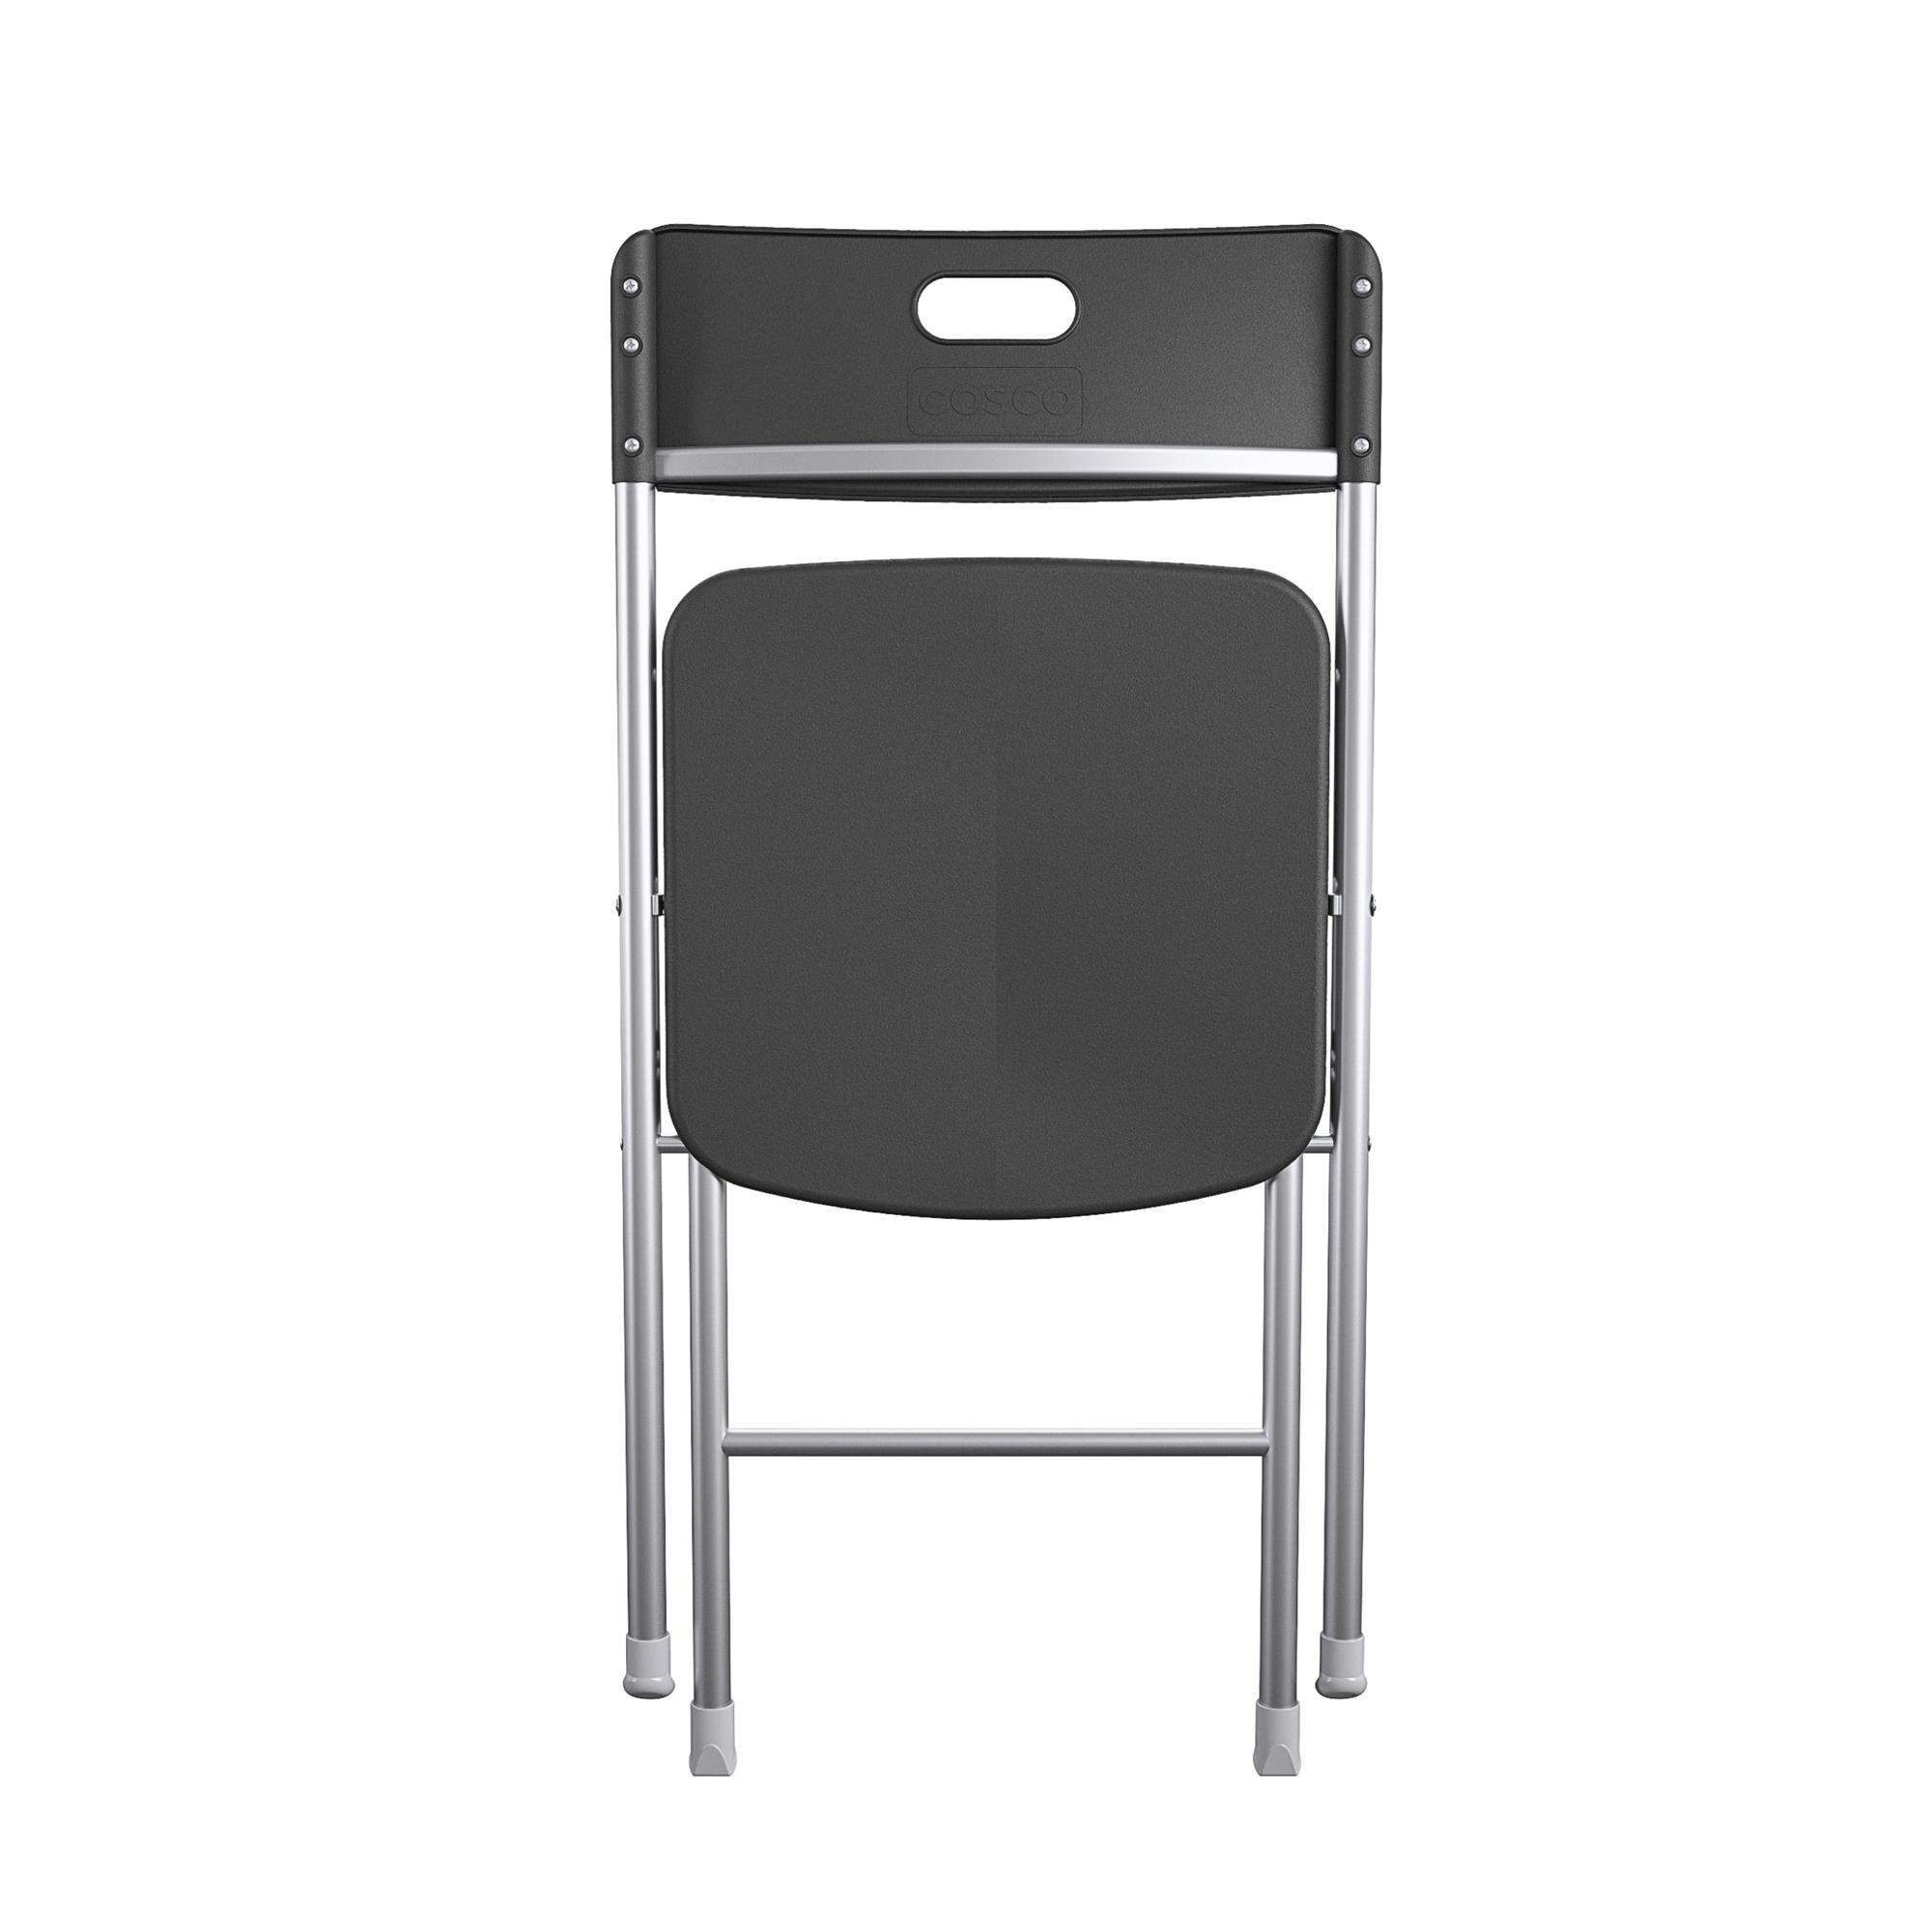 Mainstays Resin Seat & Back Folding Chair, Black - image 4 of 7